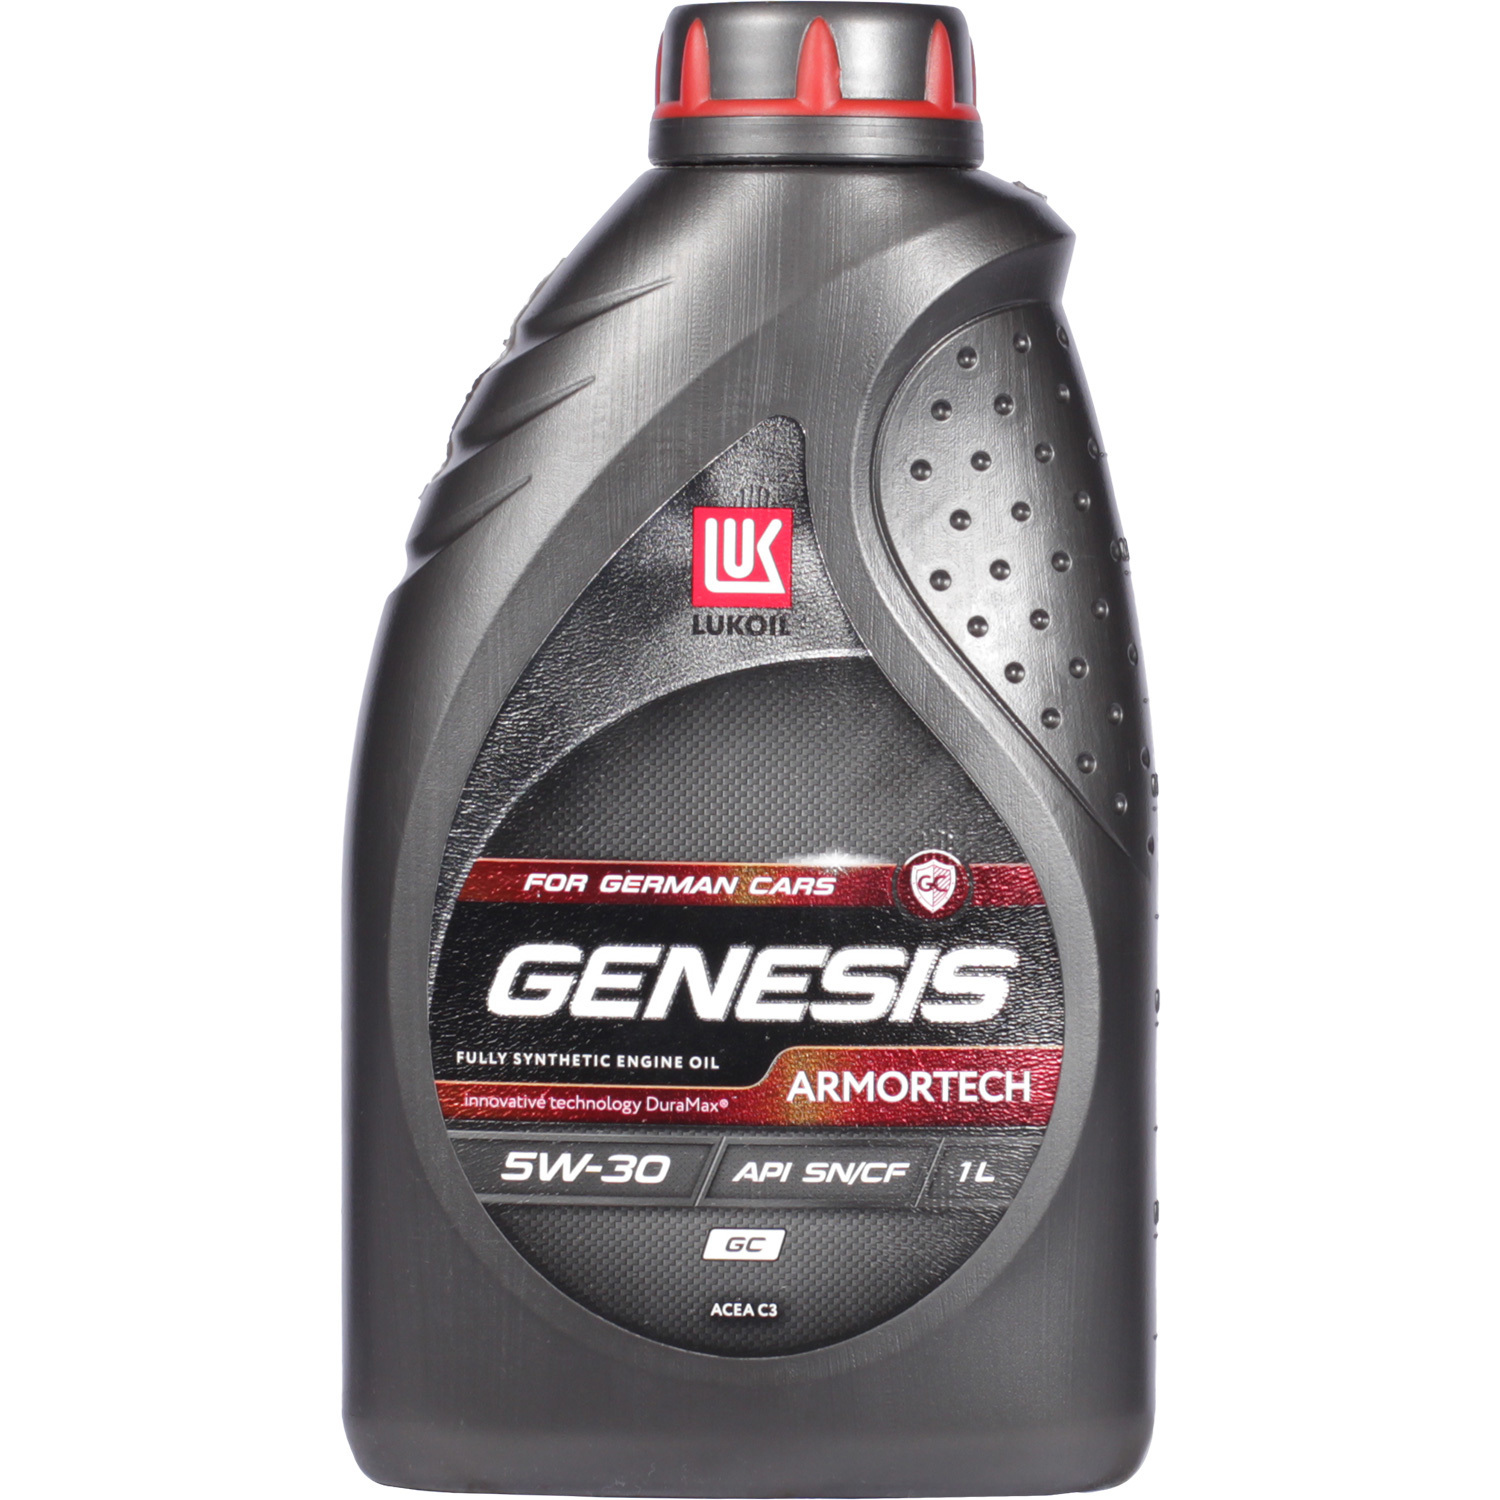 Lukoil Моторное масло Lukoil Genesis Armortech GC 5W-30, 1 л lukoil моторное масло lukoil genesis armortech jp 0w 30 1 л